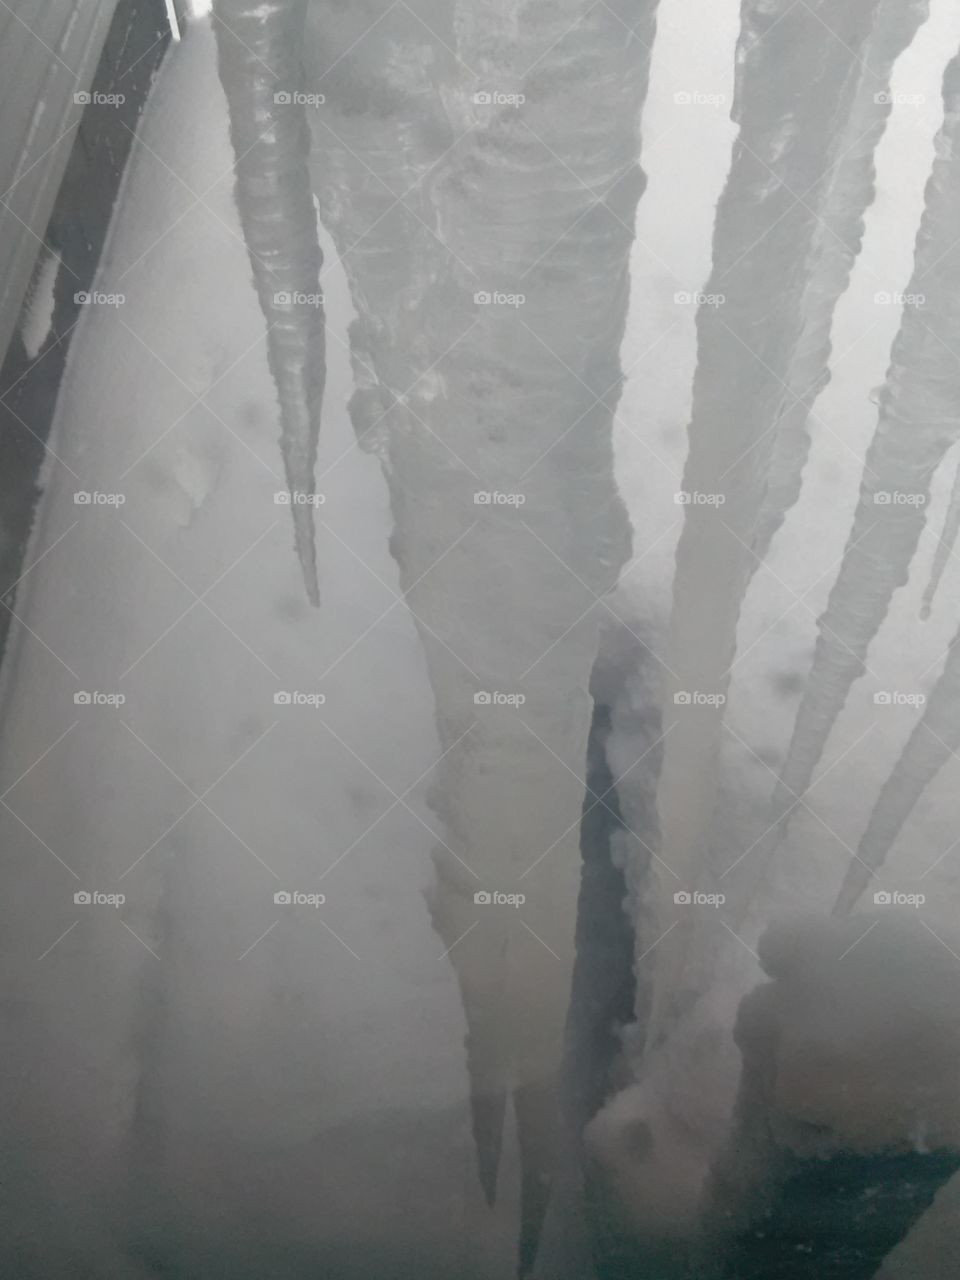 Large icicles